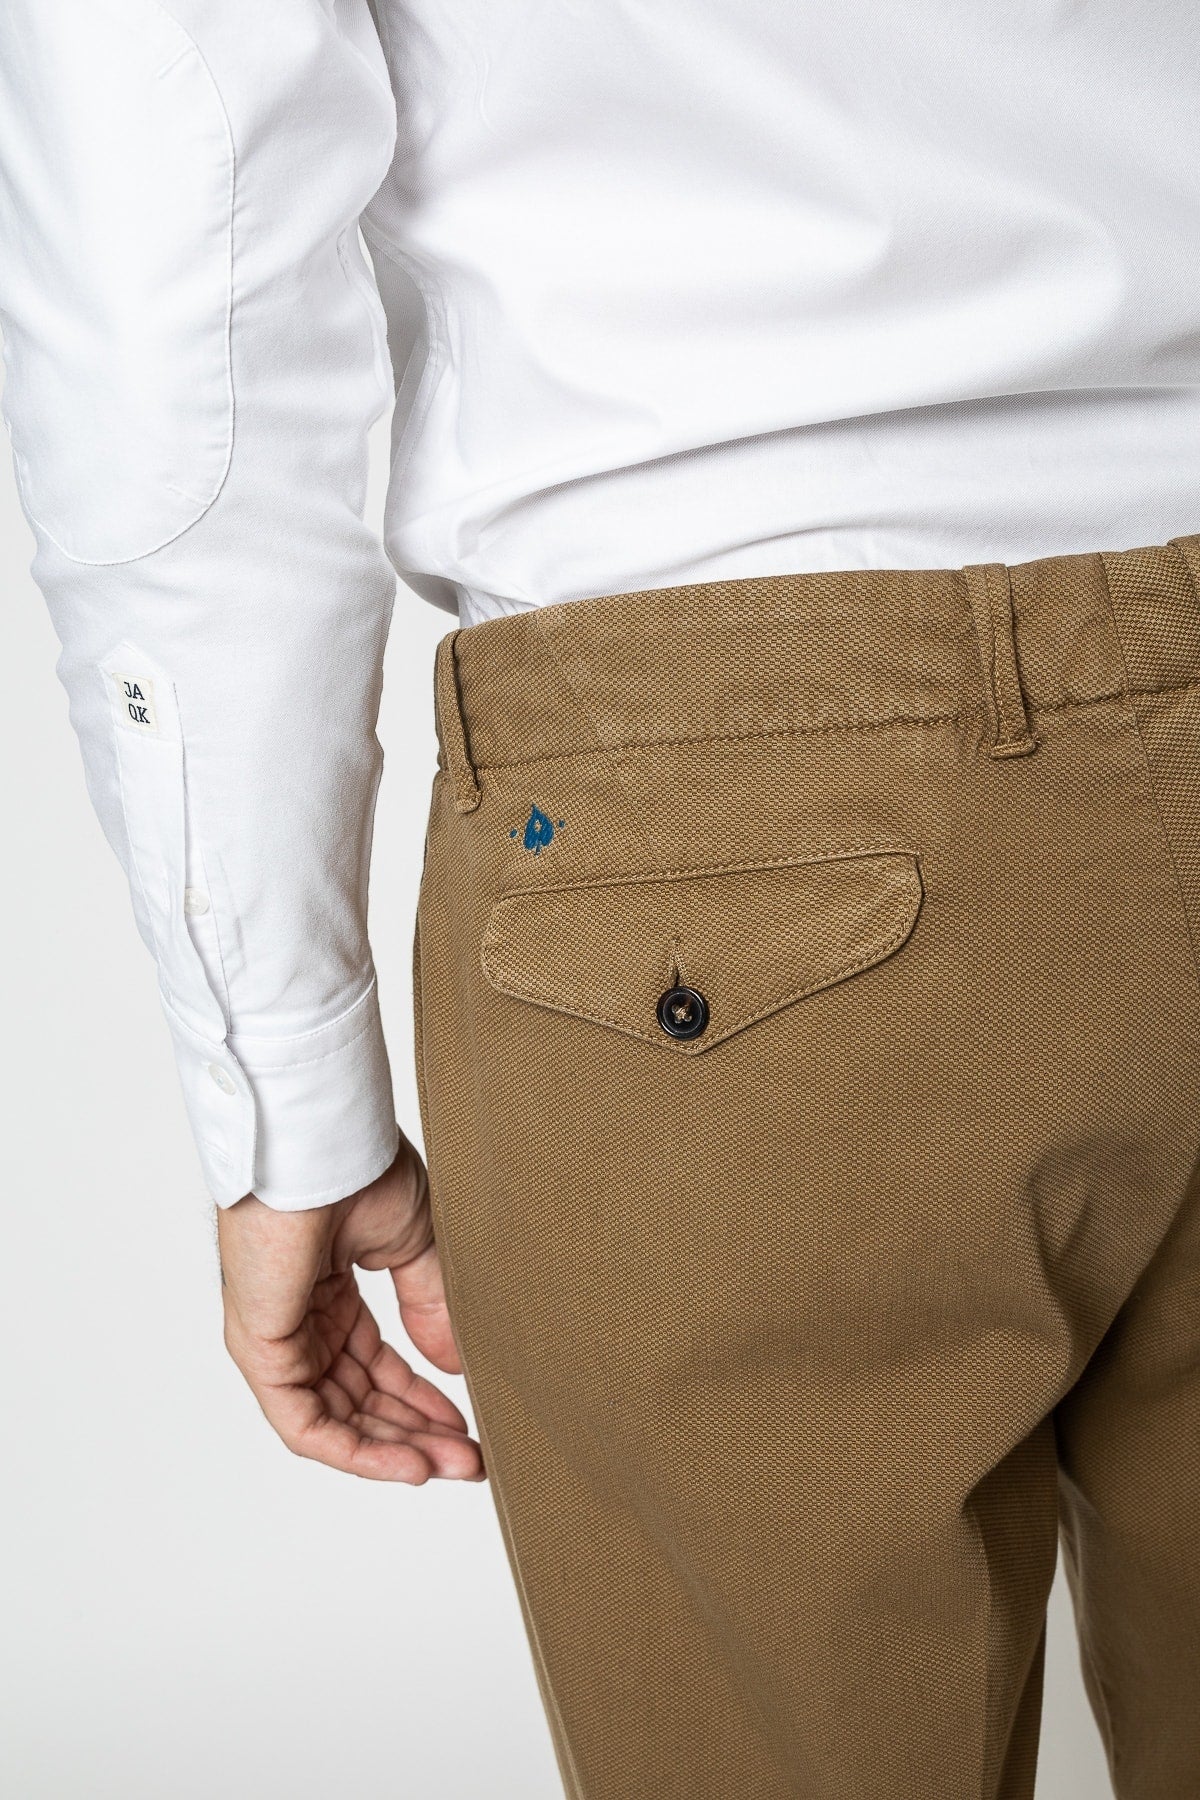 Jaqk - Brown Trousers - Closer - The Good Chic